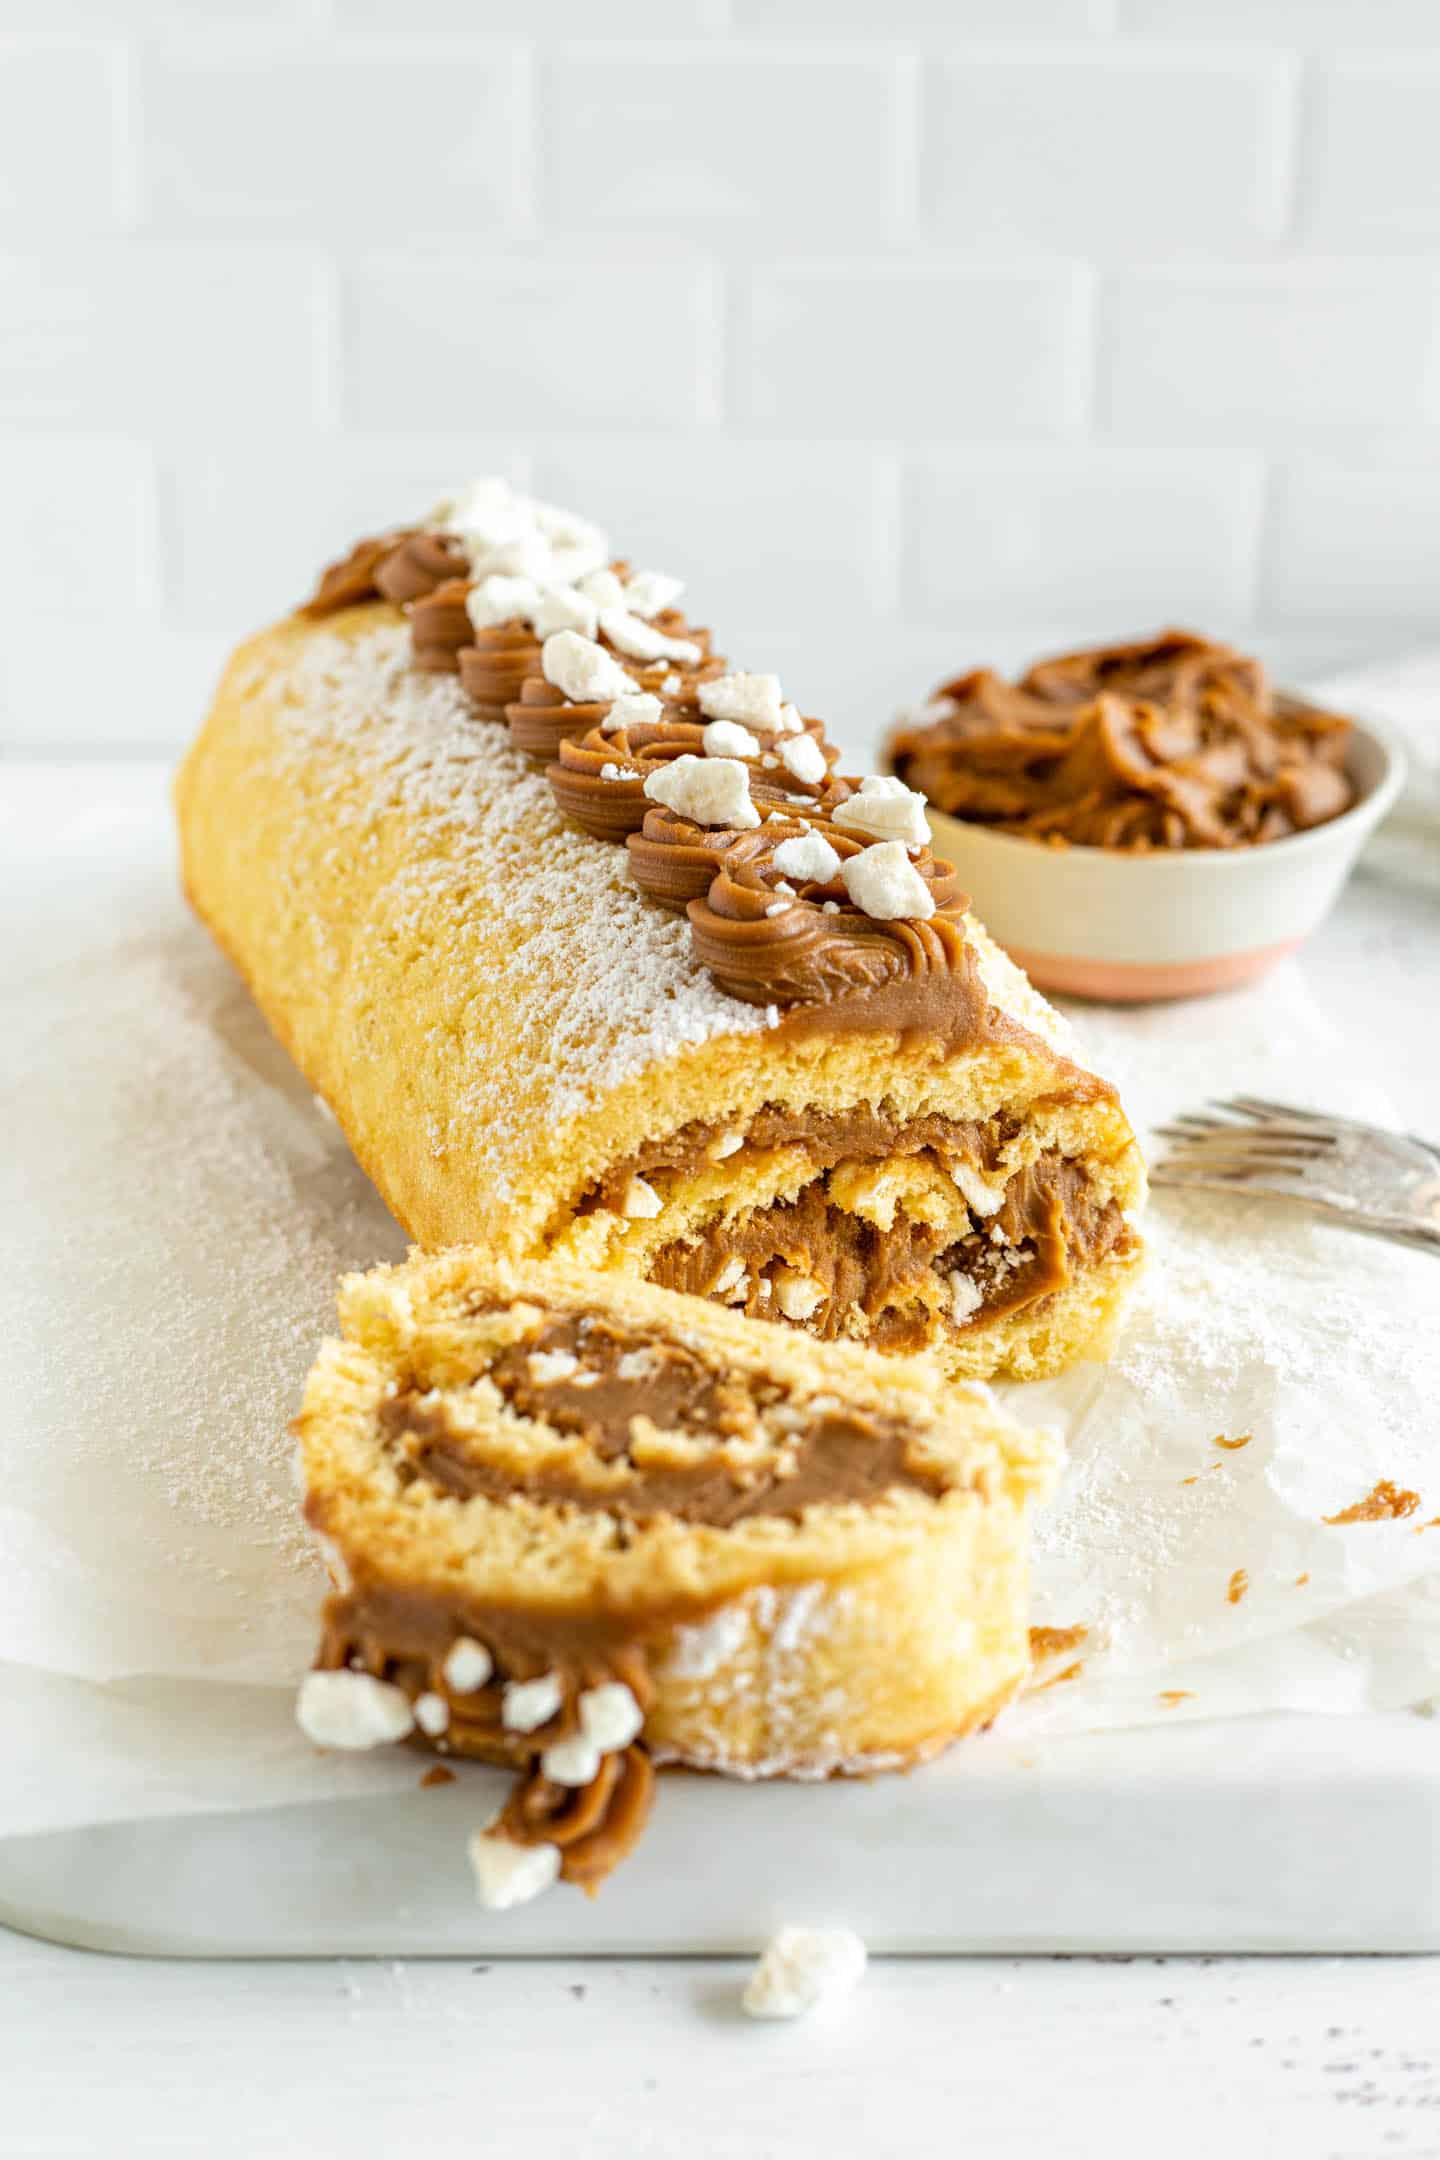 Dulce de leche cake roll on a baking sheet, and a small bowl with dulce de leche at the back